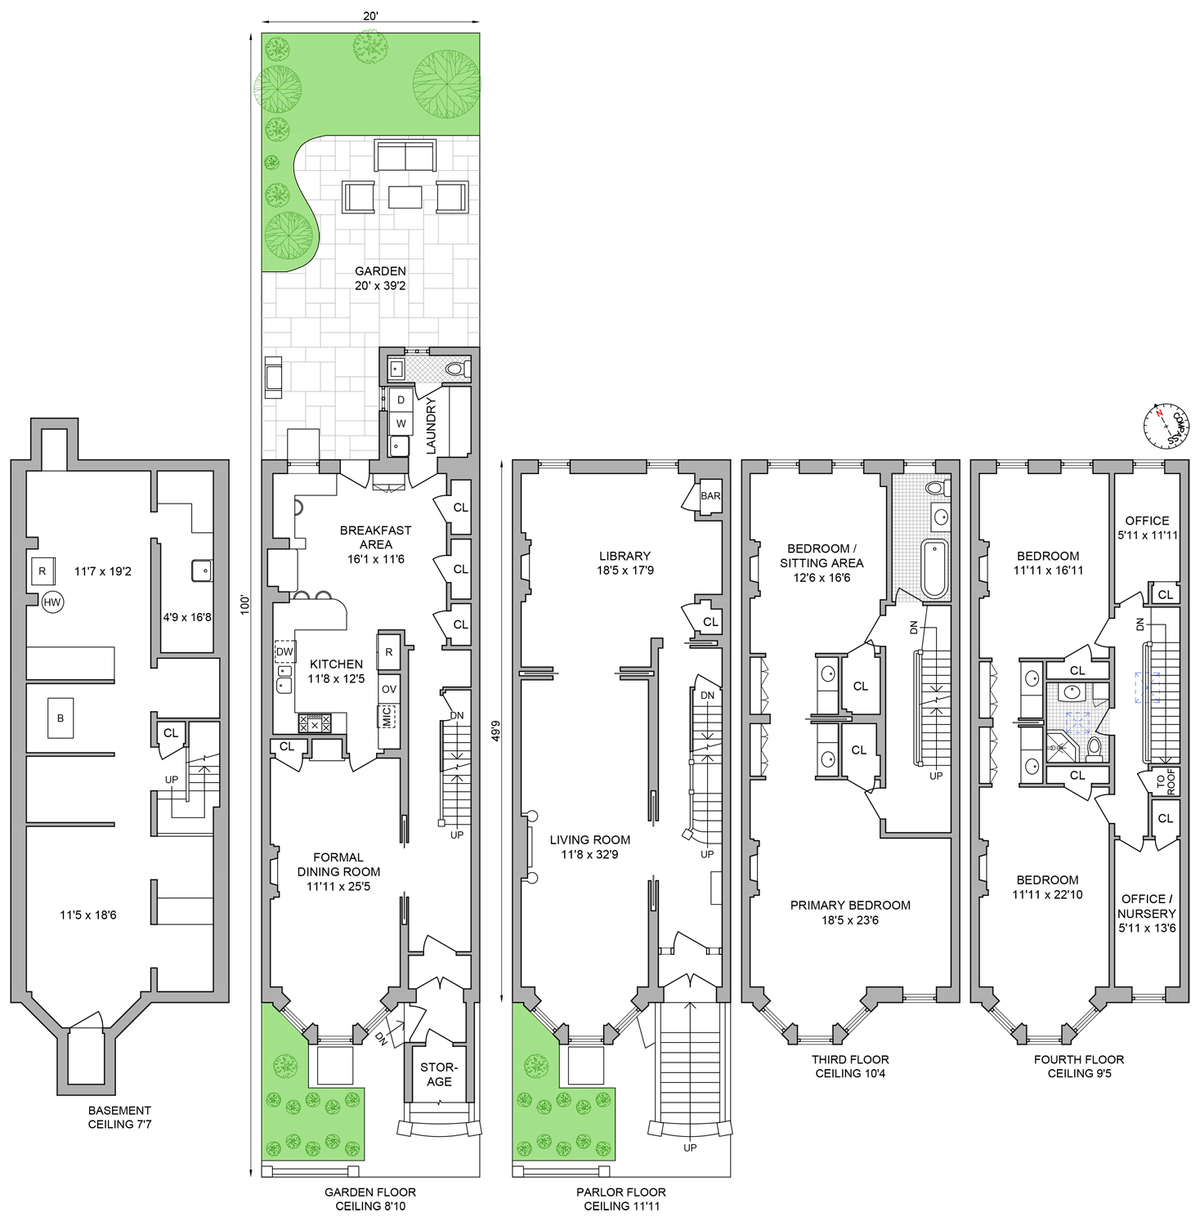 floor plan with kitchen on garden level and four floors of living space